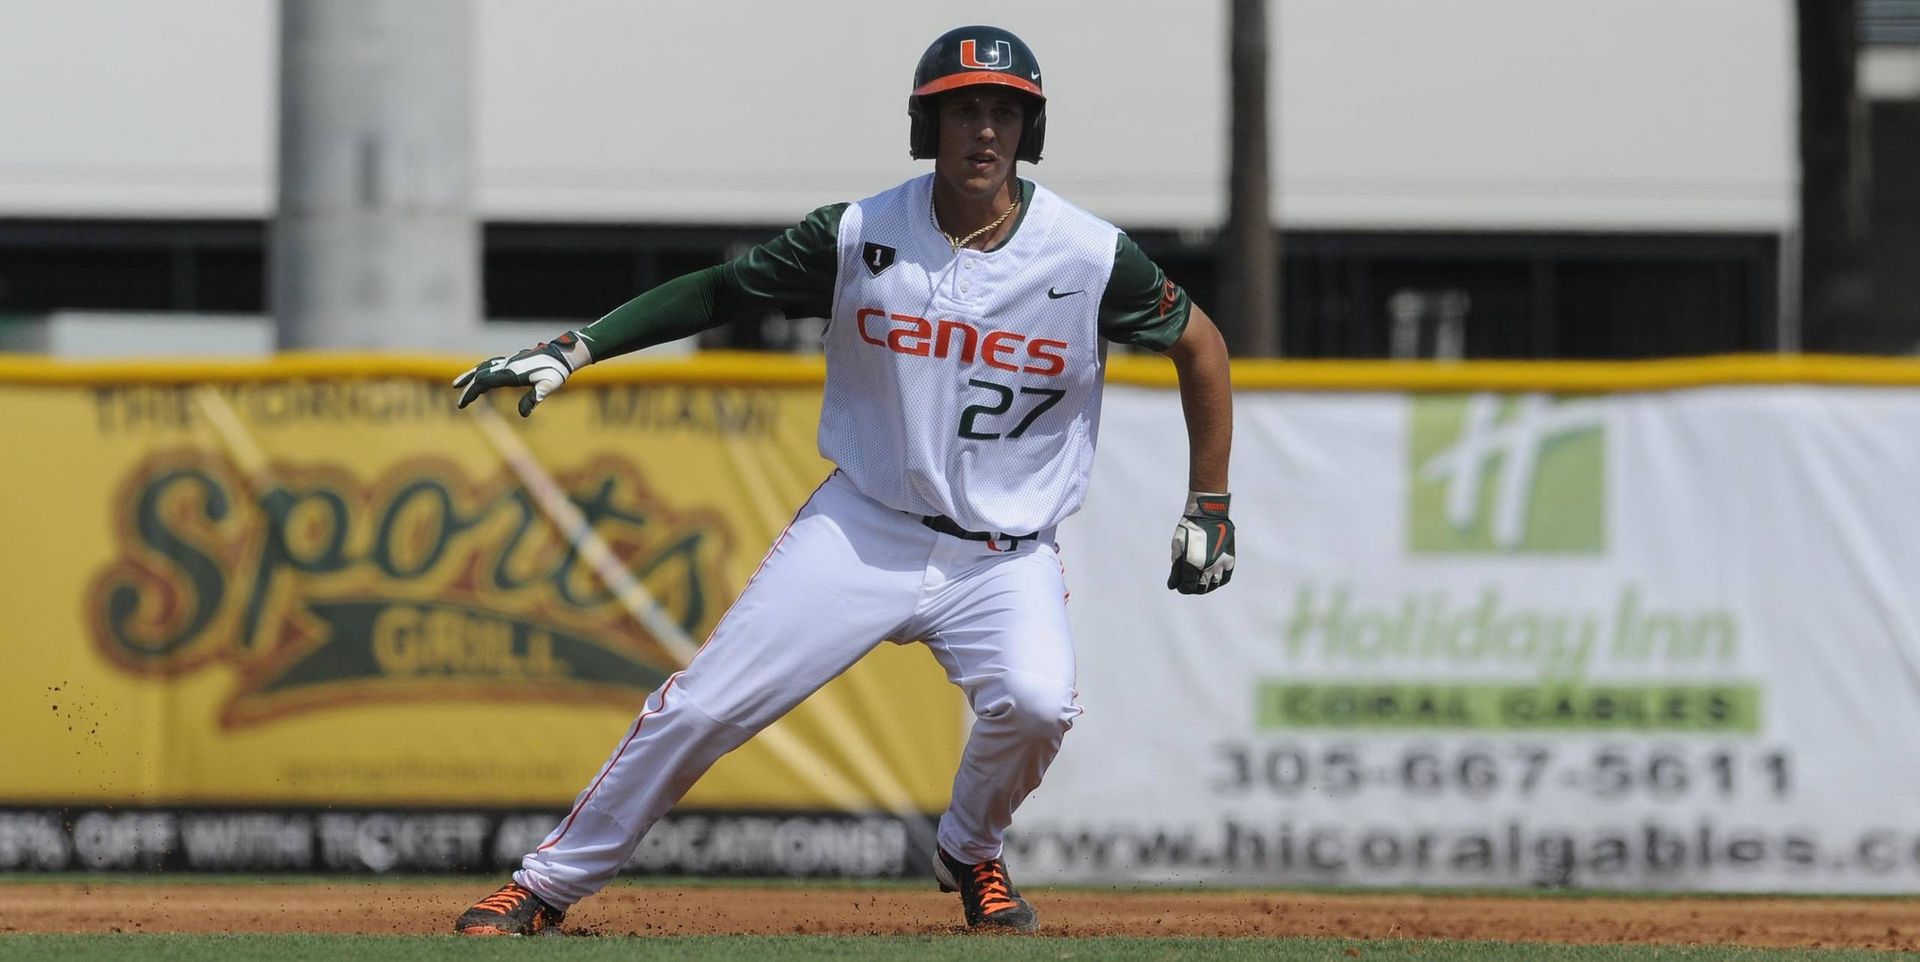 Fieger Sparks No. 29 Miami to 9-2 Victory